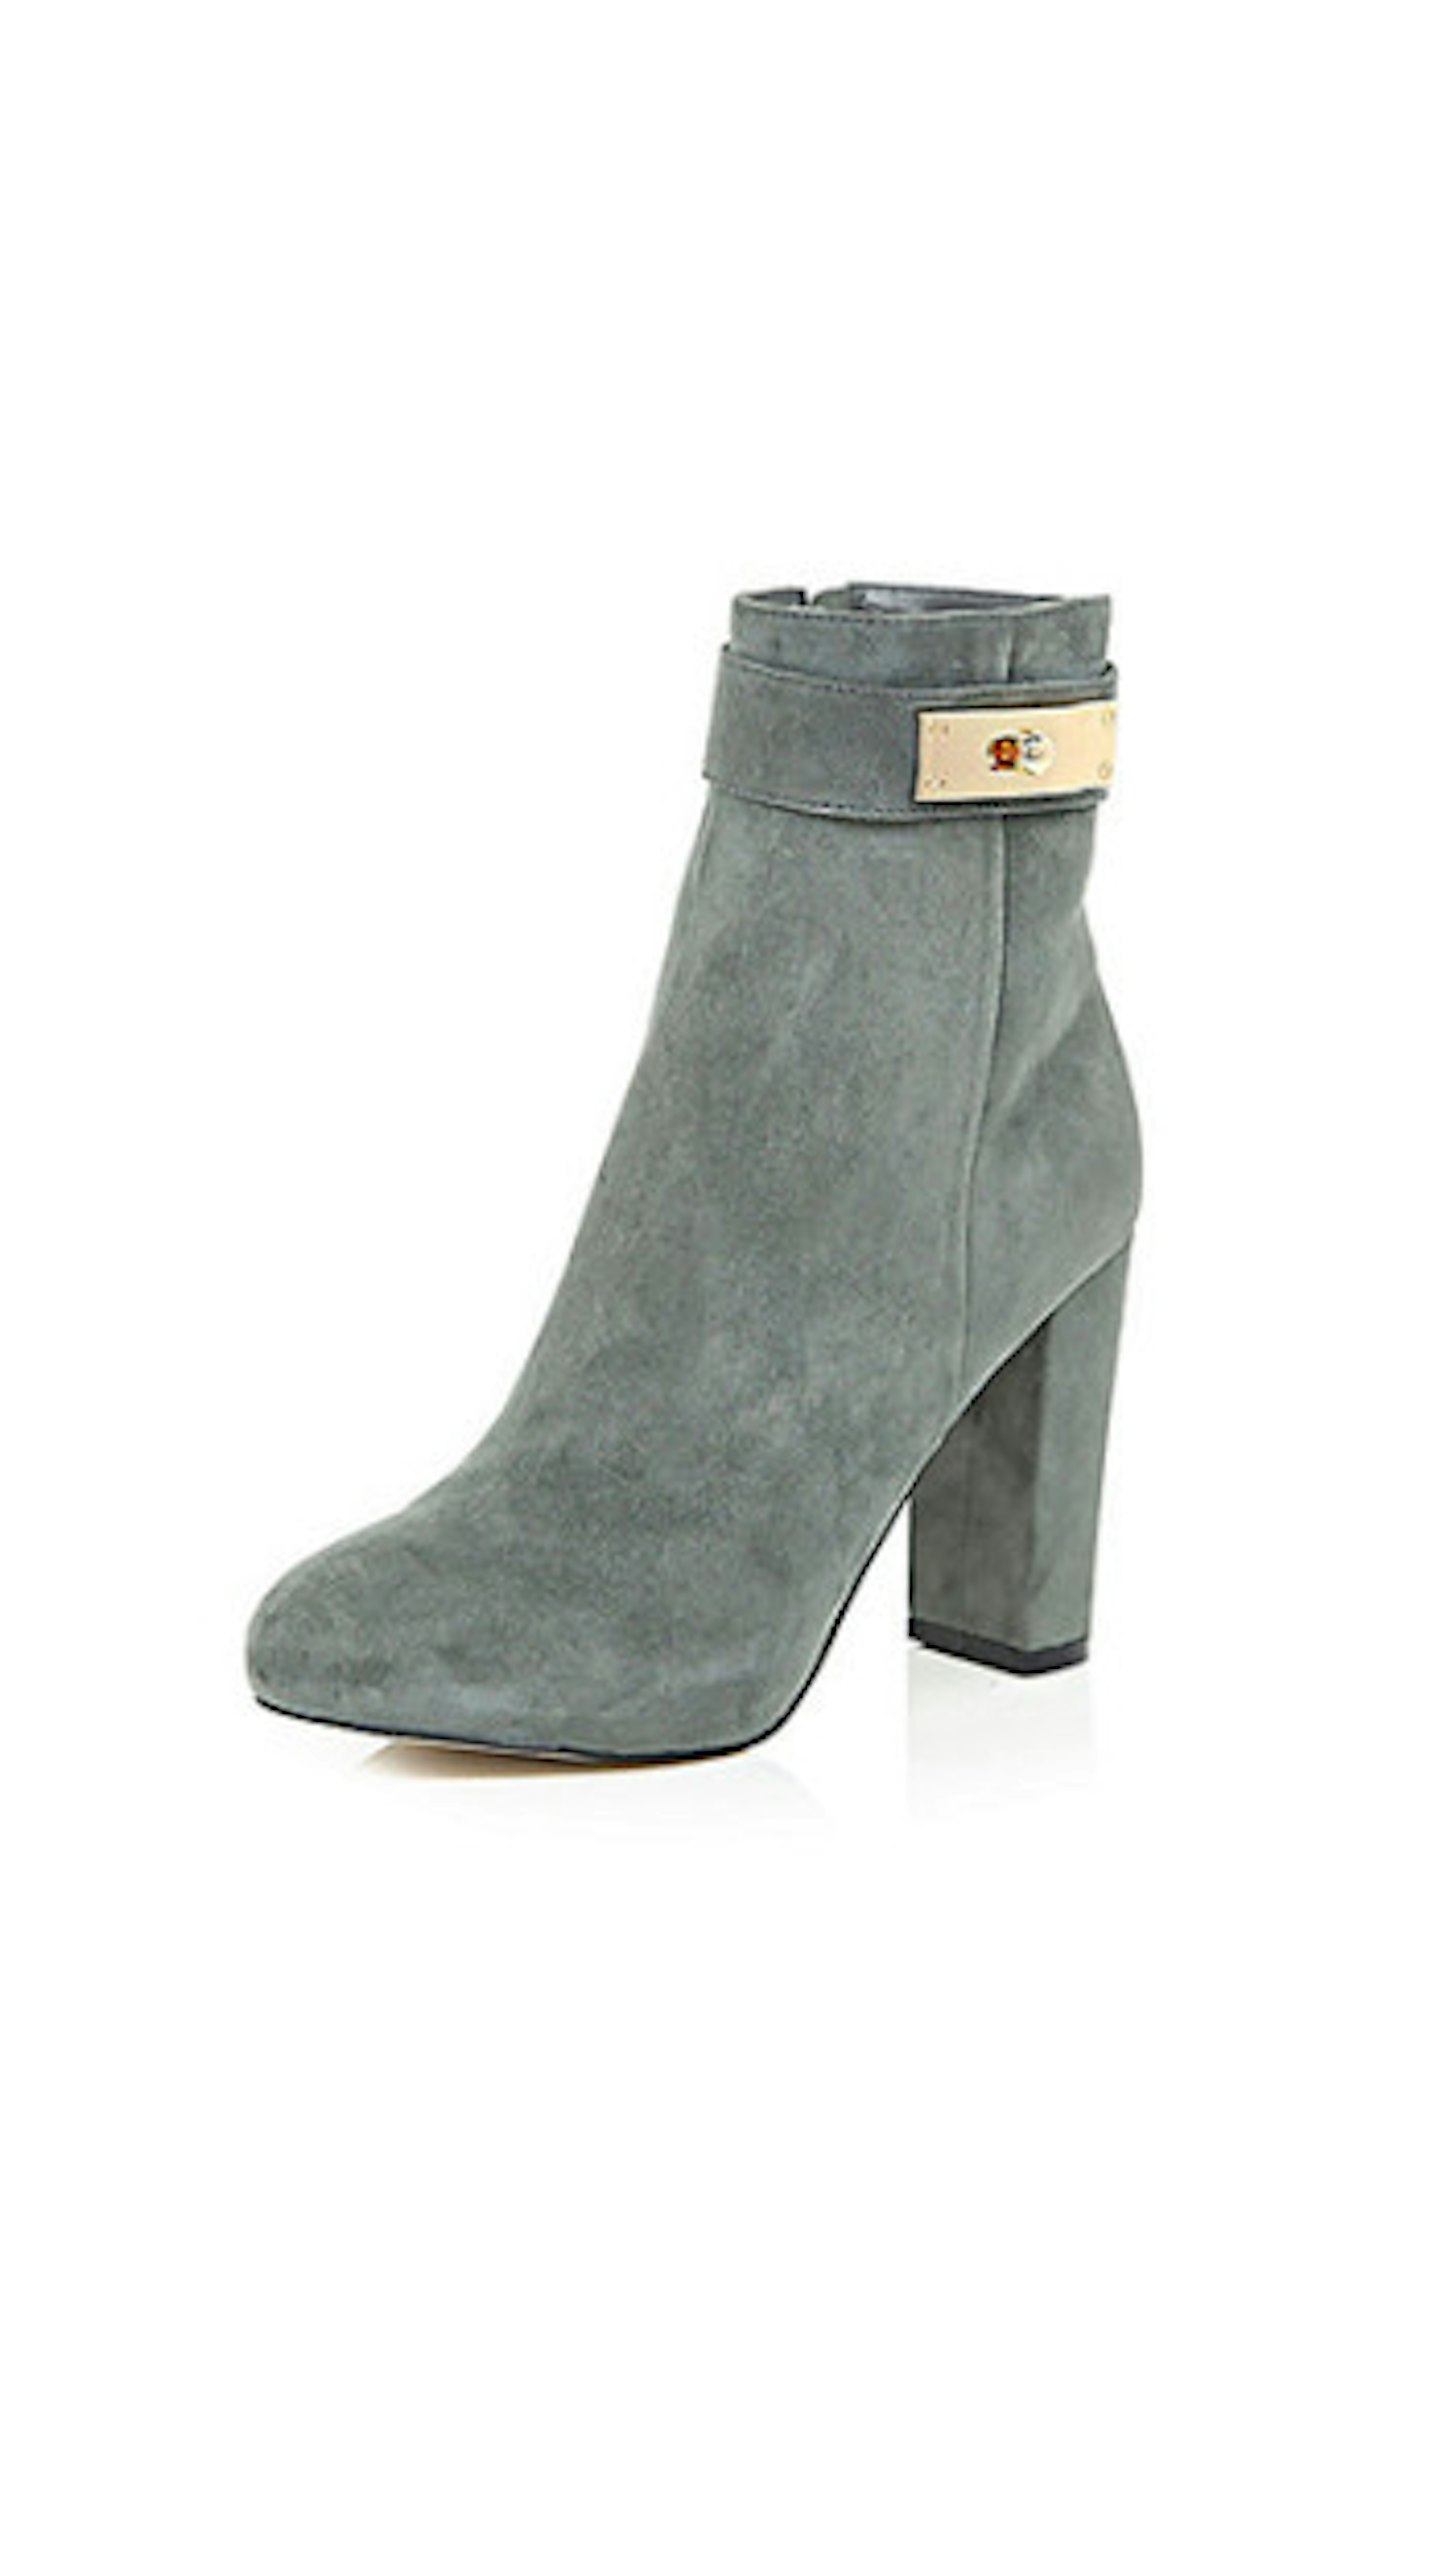 Grey suede lock heeled ankle boots, £75